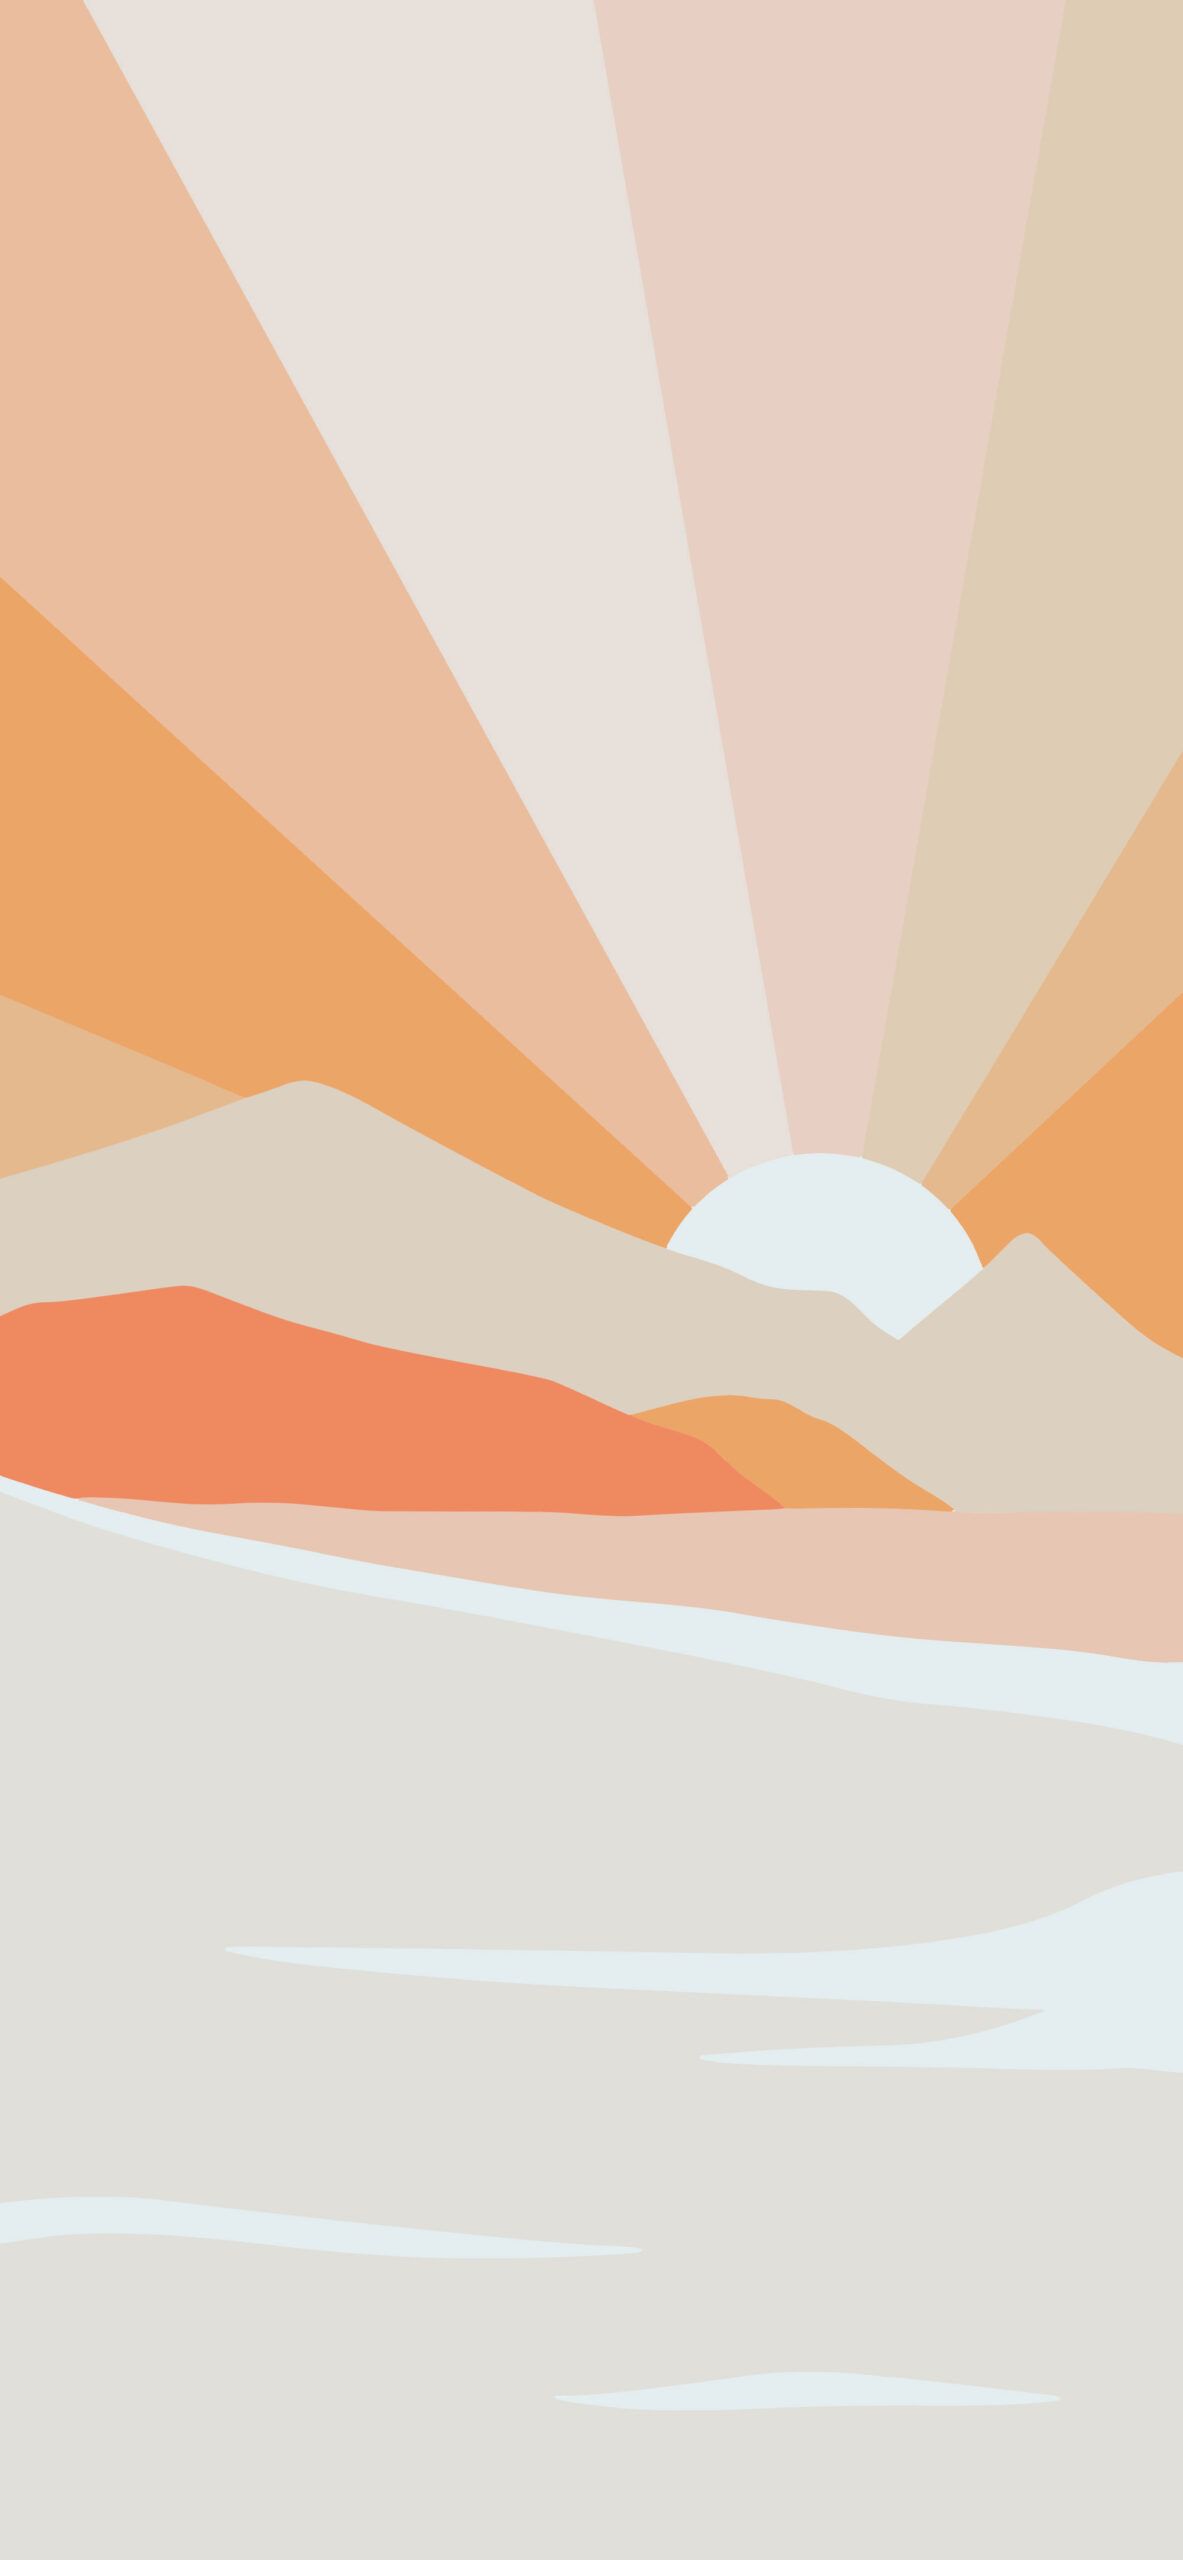 A sunset over the ocean with mountains in background - Android, sunset, pastel, pastel minimalist